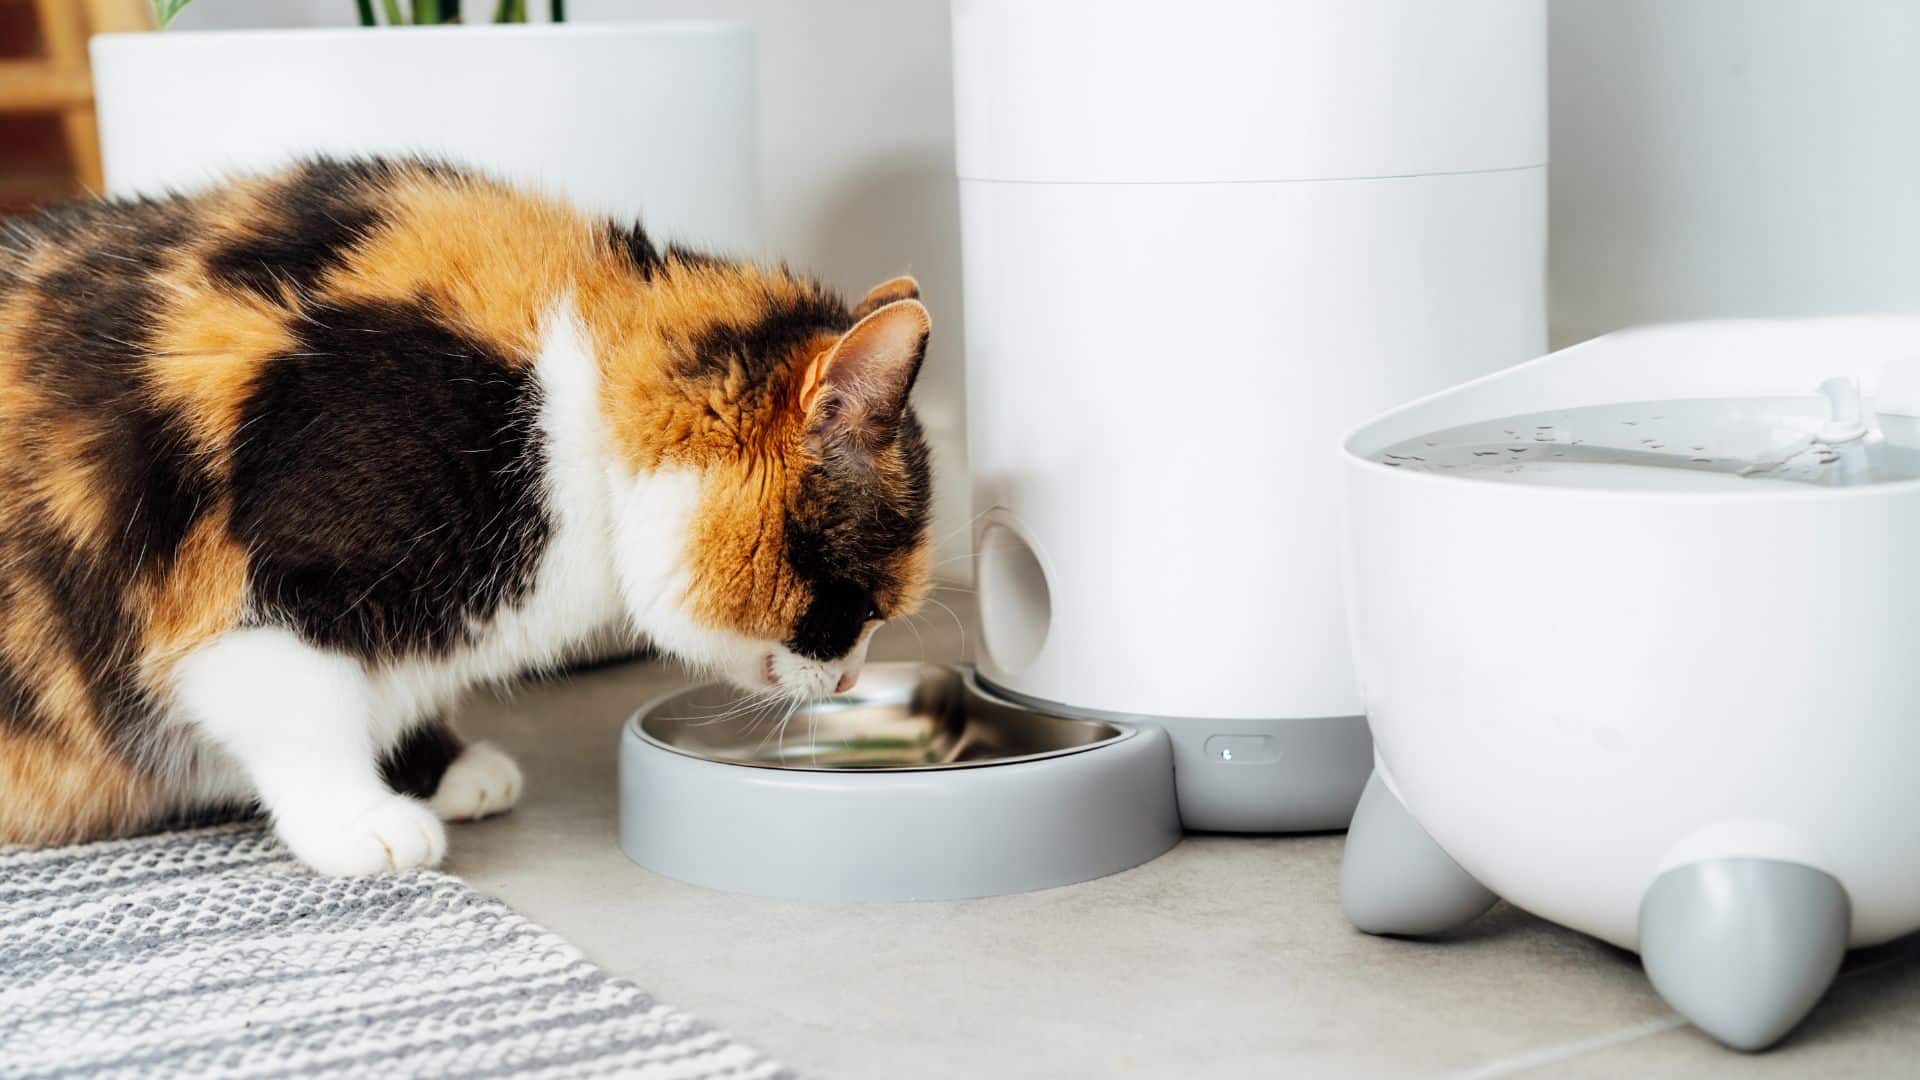 Use your own devices to feed your dog or cat remotely